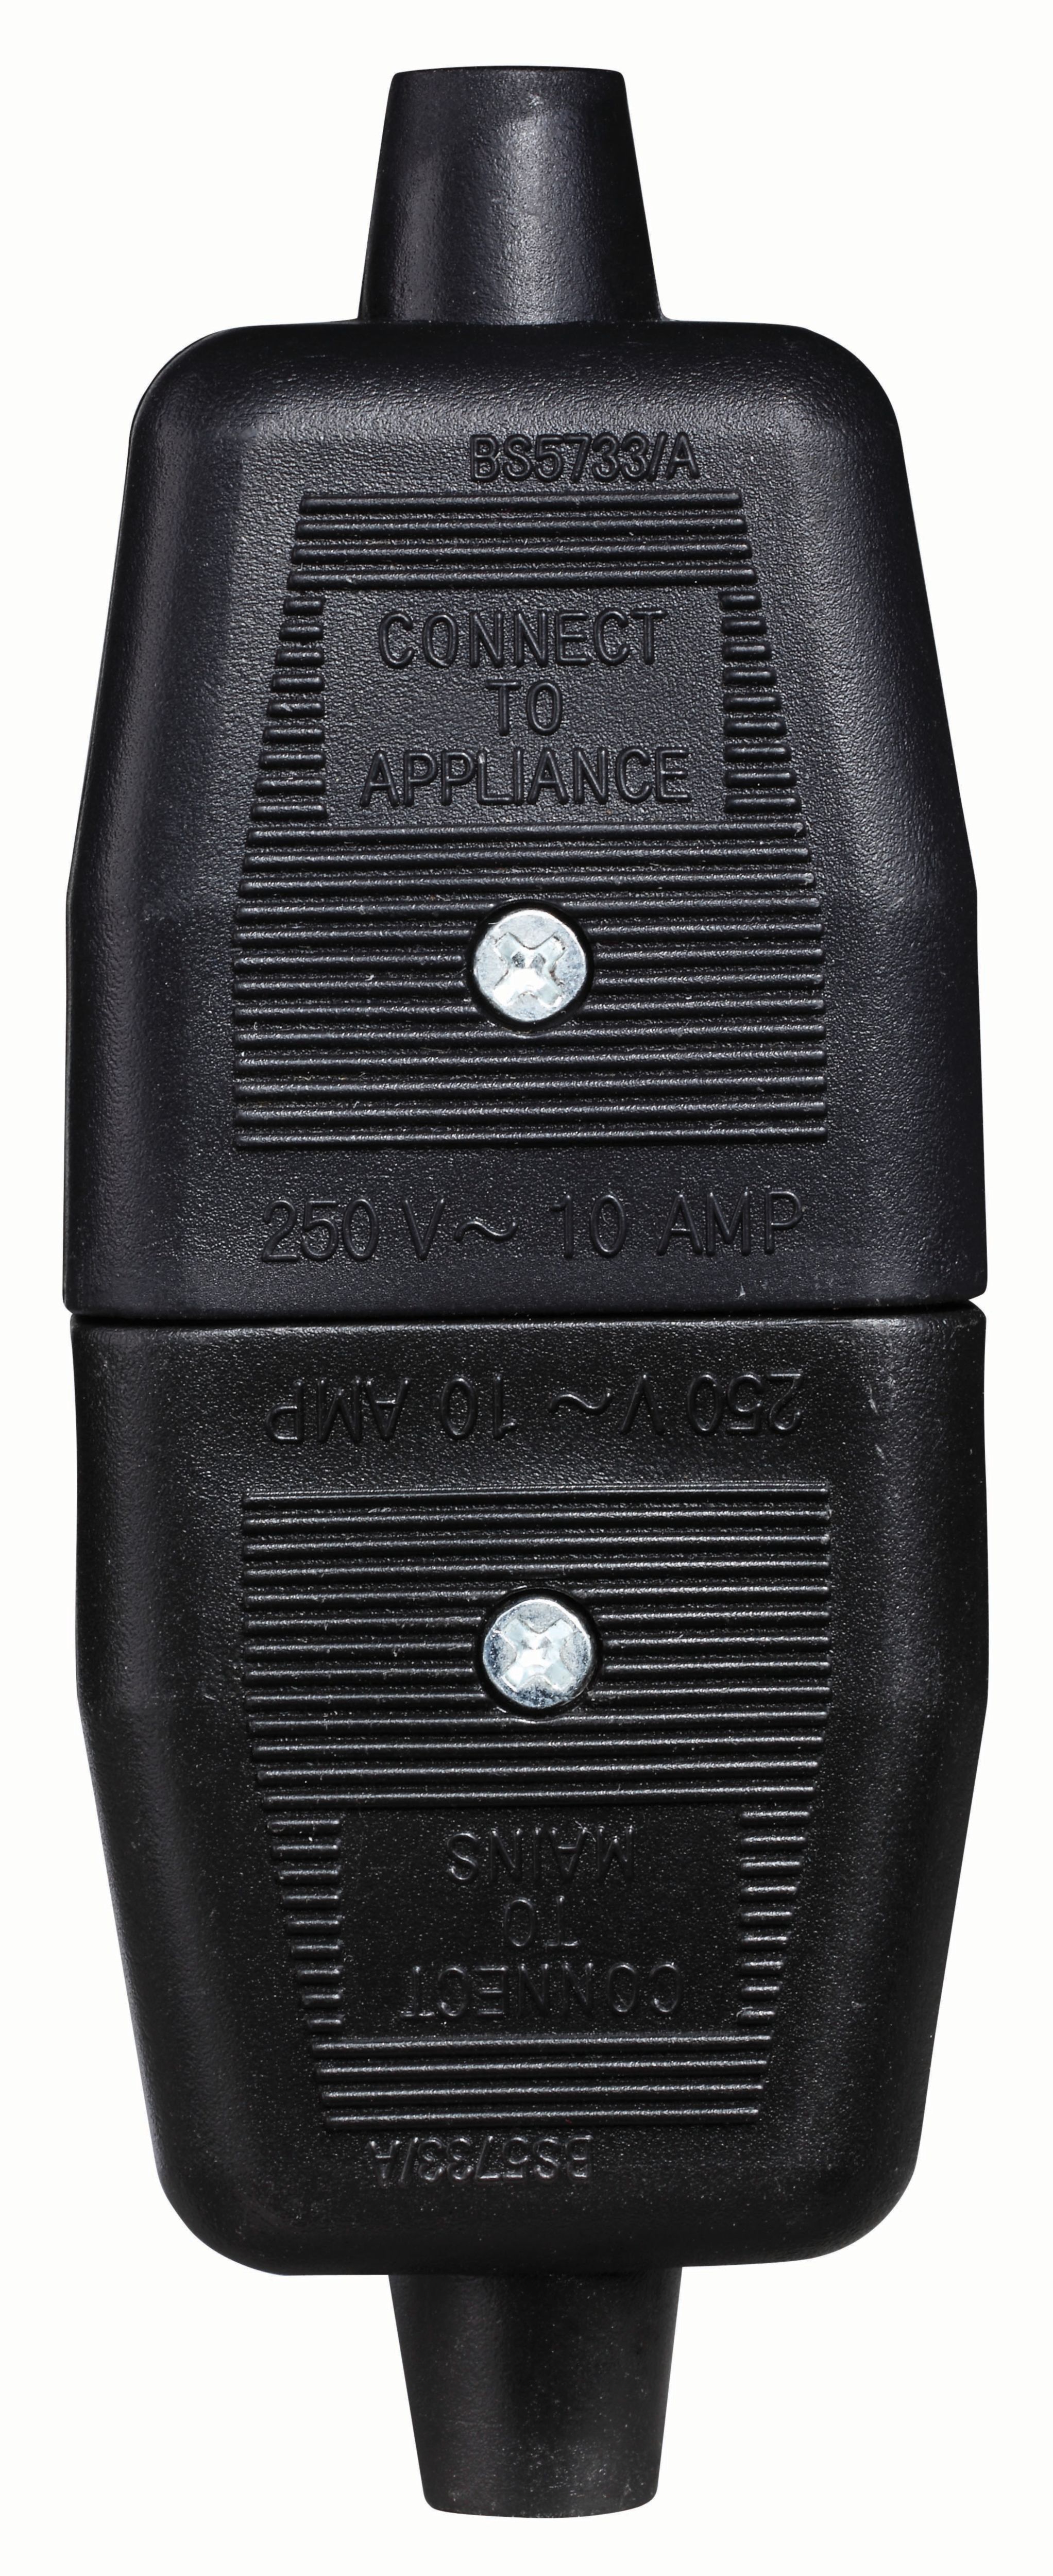 Image of Masterplug 3 Pin Non-Reversible Connector - Black 10A